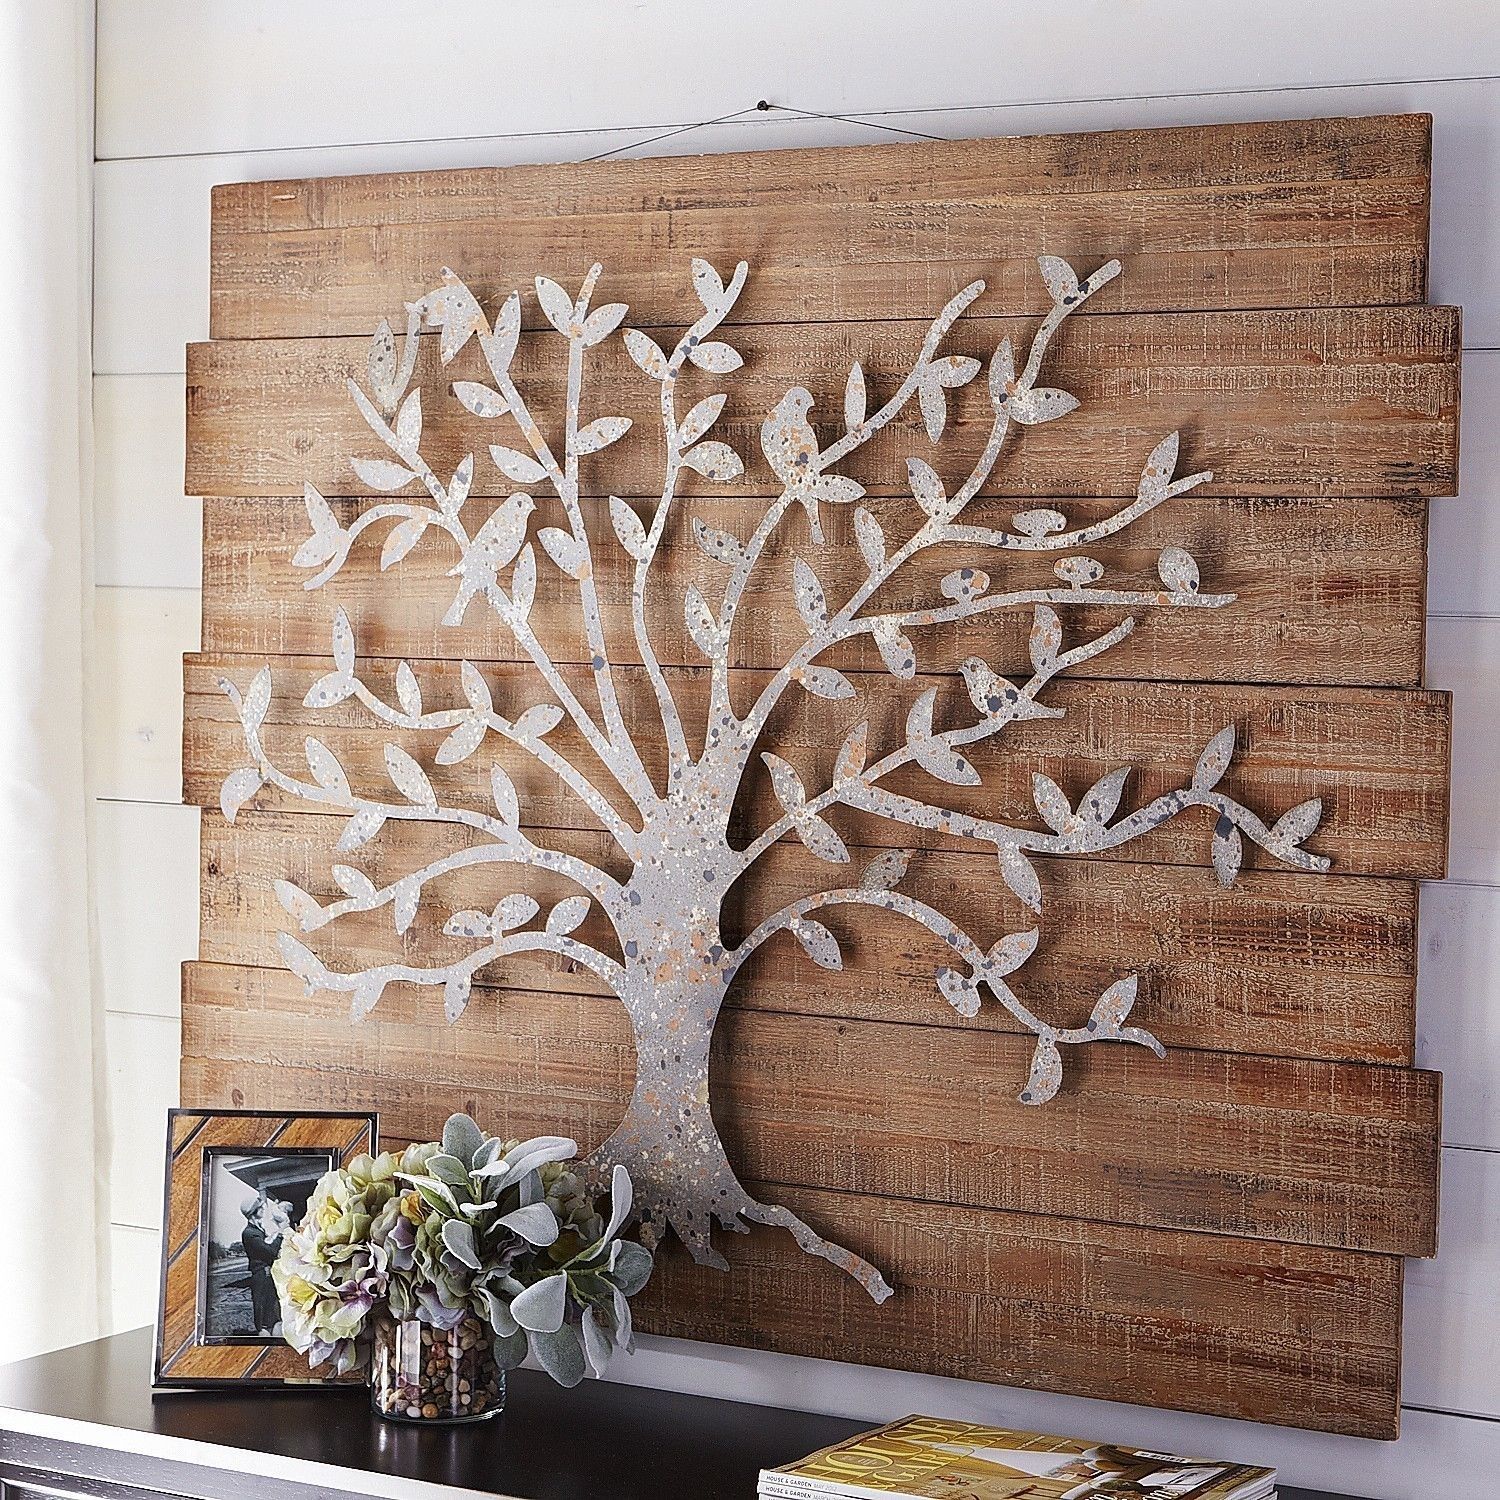 Timeless Tree Wall Decor | Pier 1 Imports … | Metal Work In 2018… Inside Tree Of Life Metal Wall Art (Photo 4 of 20)